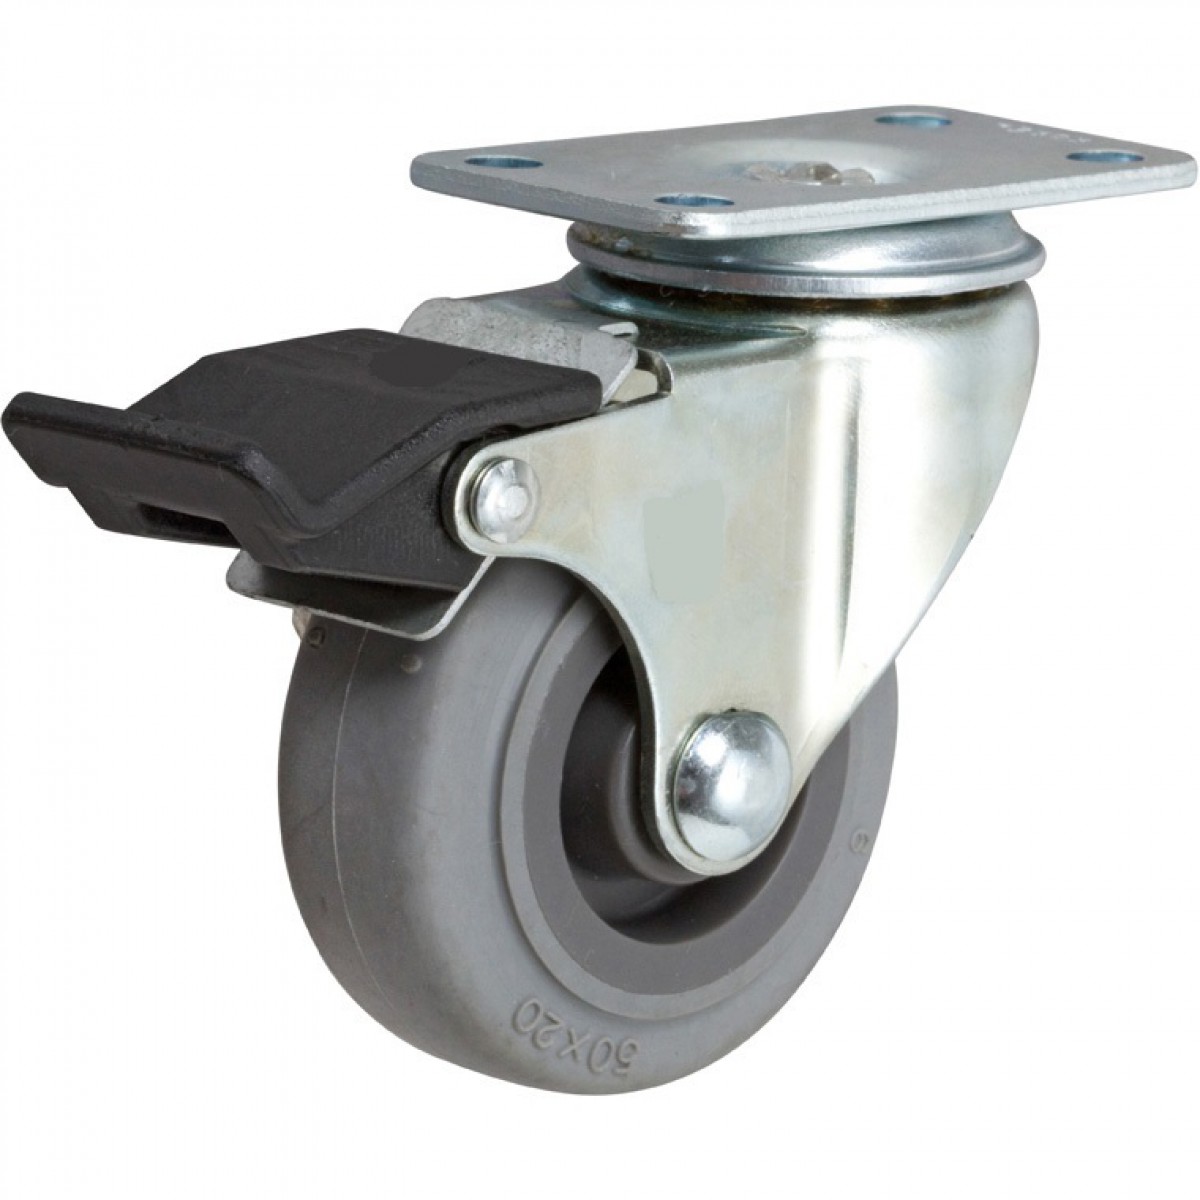 https://www.humphriescasters.com/pages/casters-and-wheels/image/Rubbermaid%20Replacement%20Caster%20with%20Total%20lock%20Brake-106.jpg